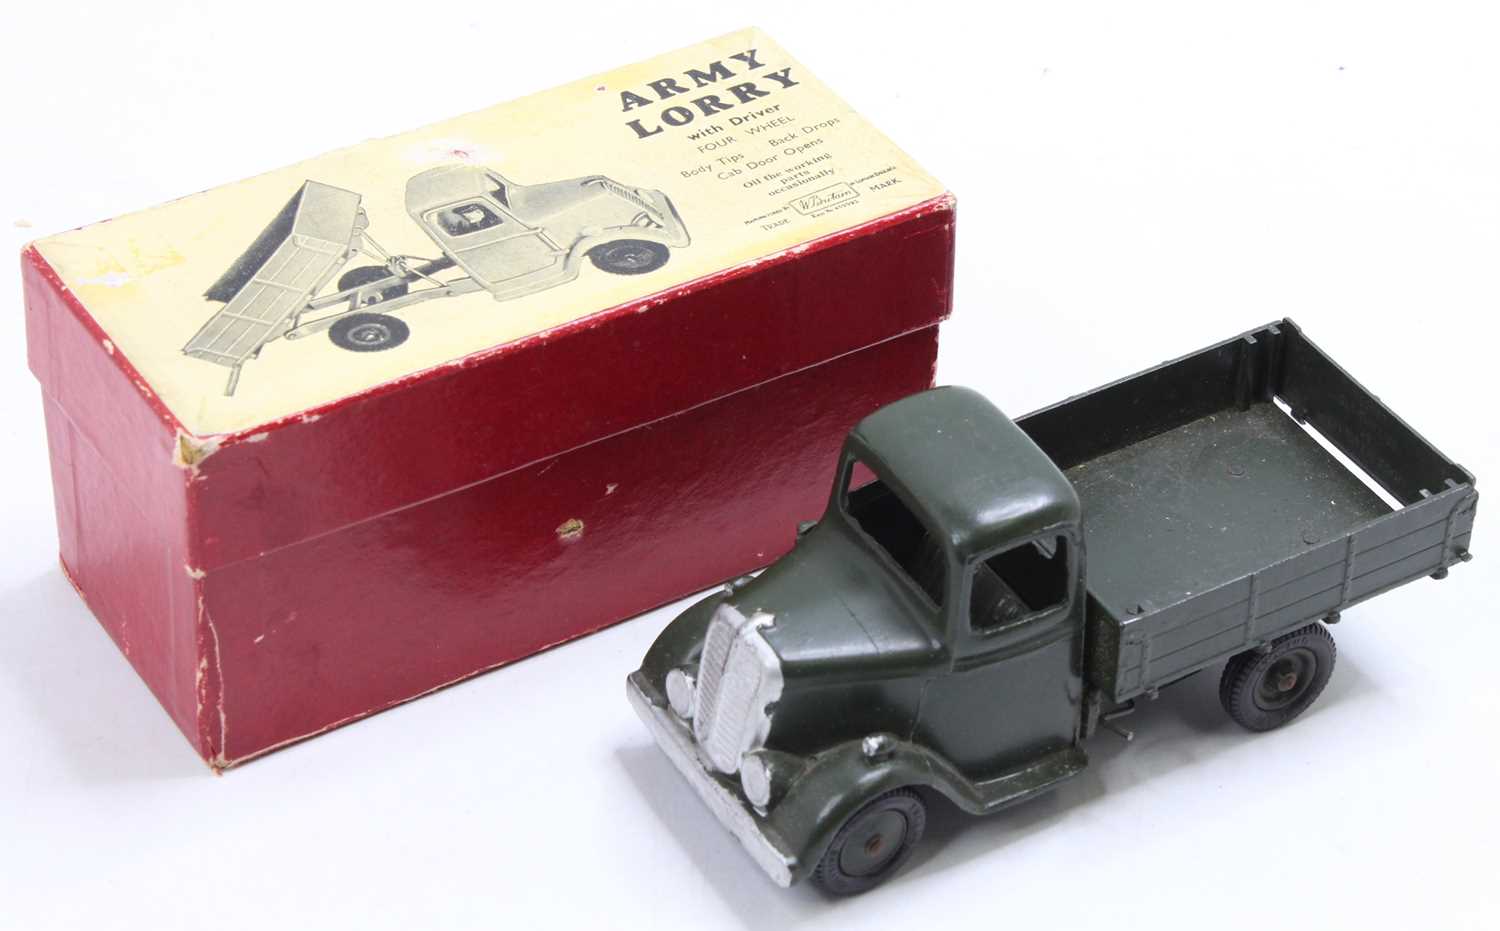 A Britains No. 1334 Army lorry comprising of military drab green body with matching hubs, housed